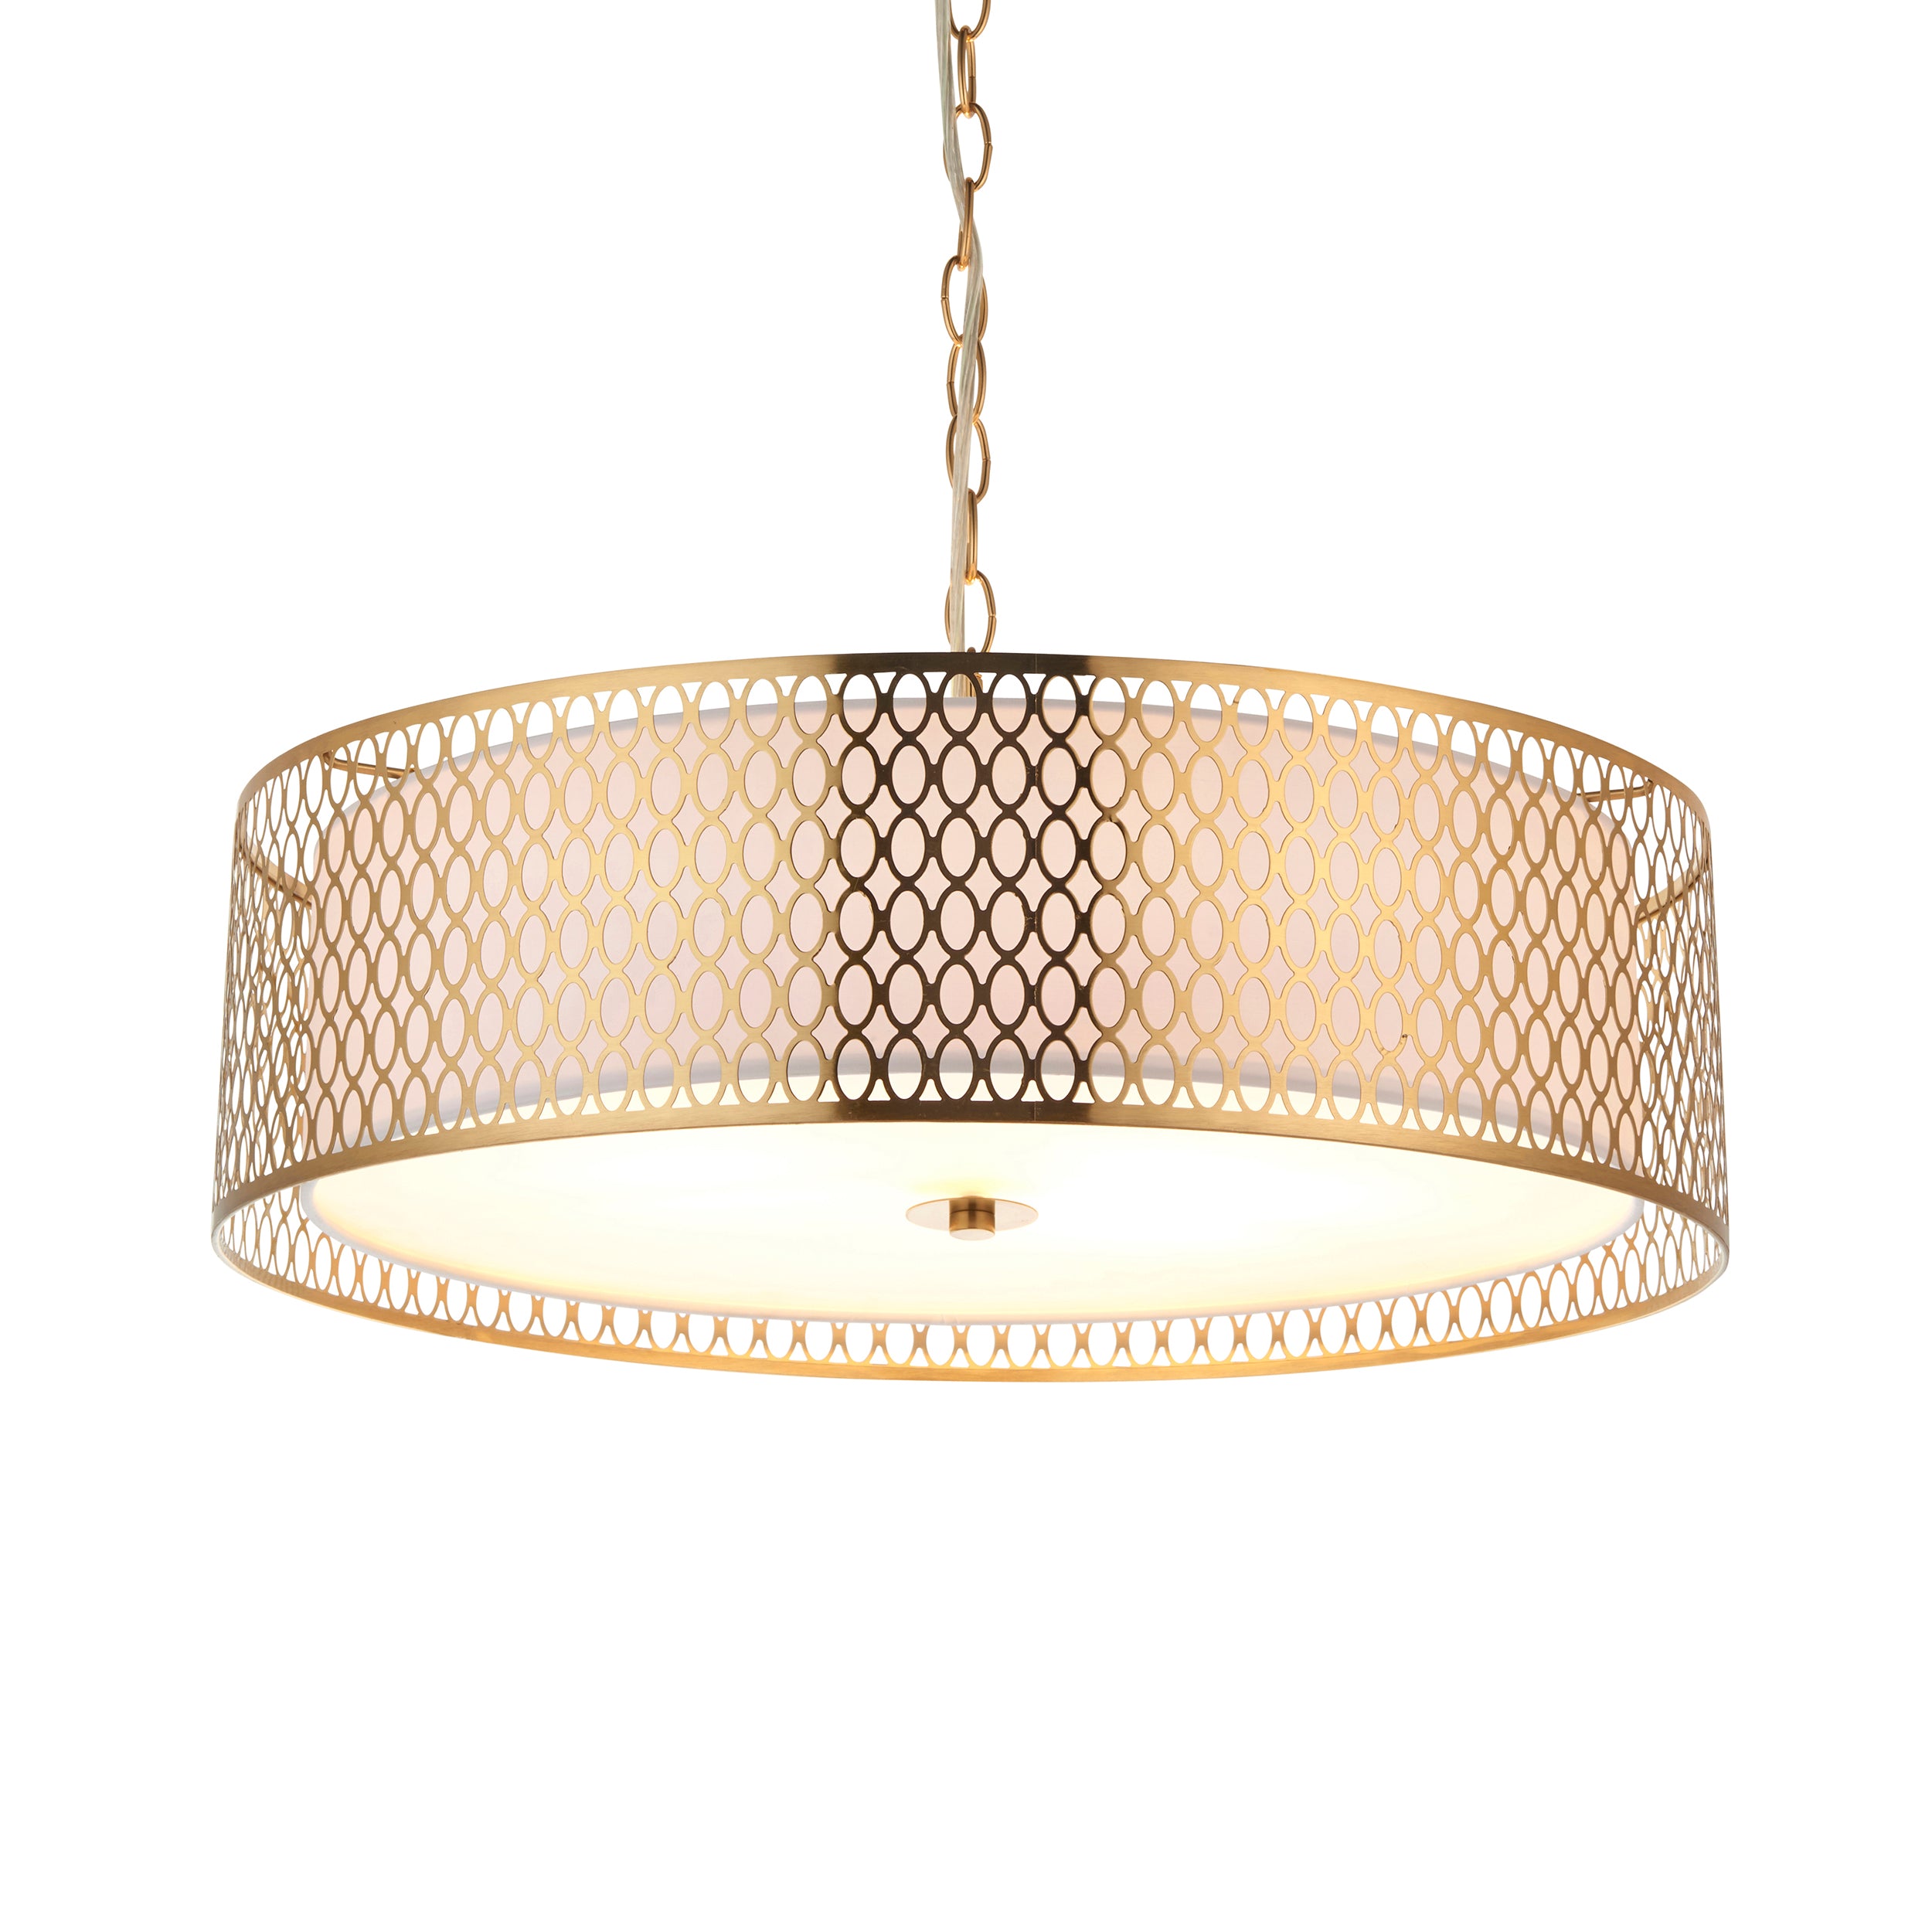 Cordero 3 Light Pendant. Gold Effect Plate, White Fabric & Frosted Glass